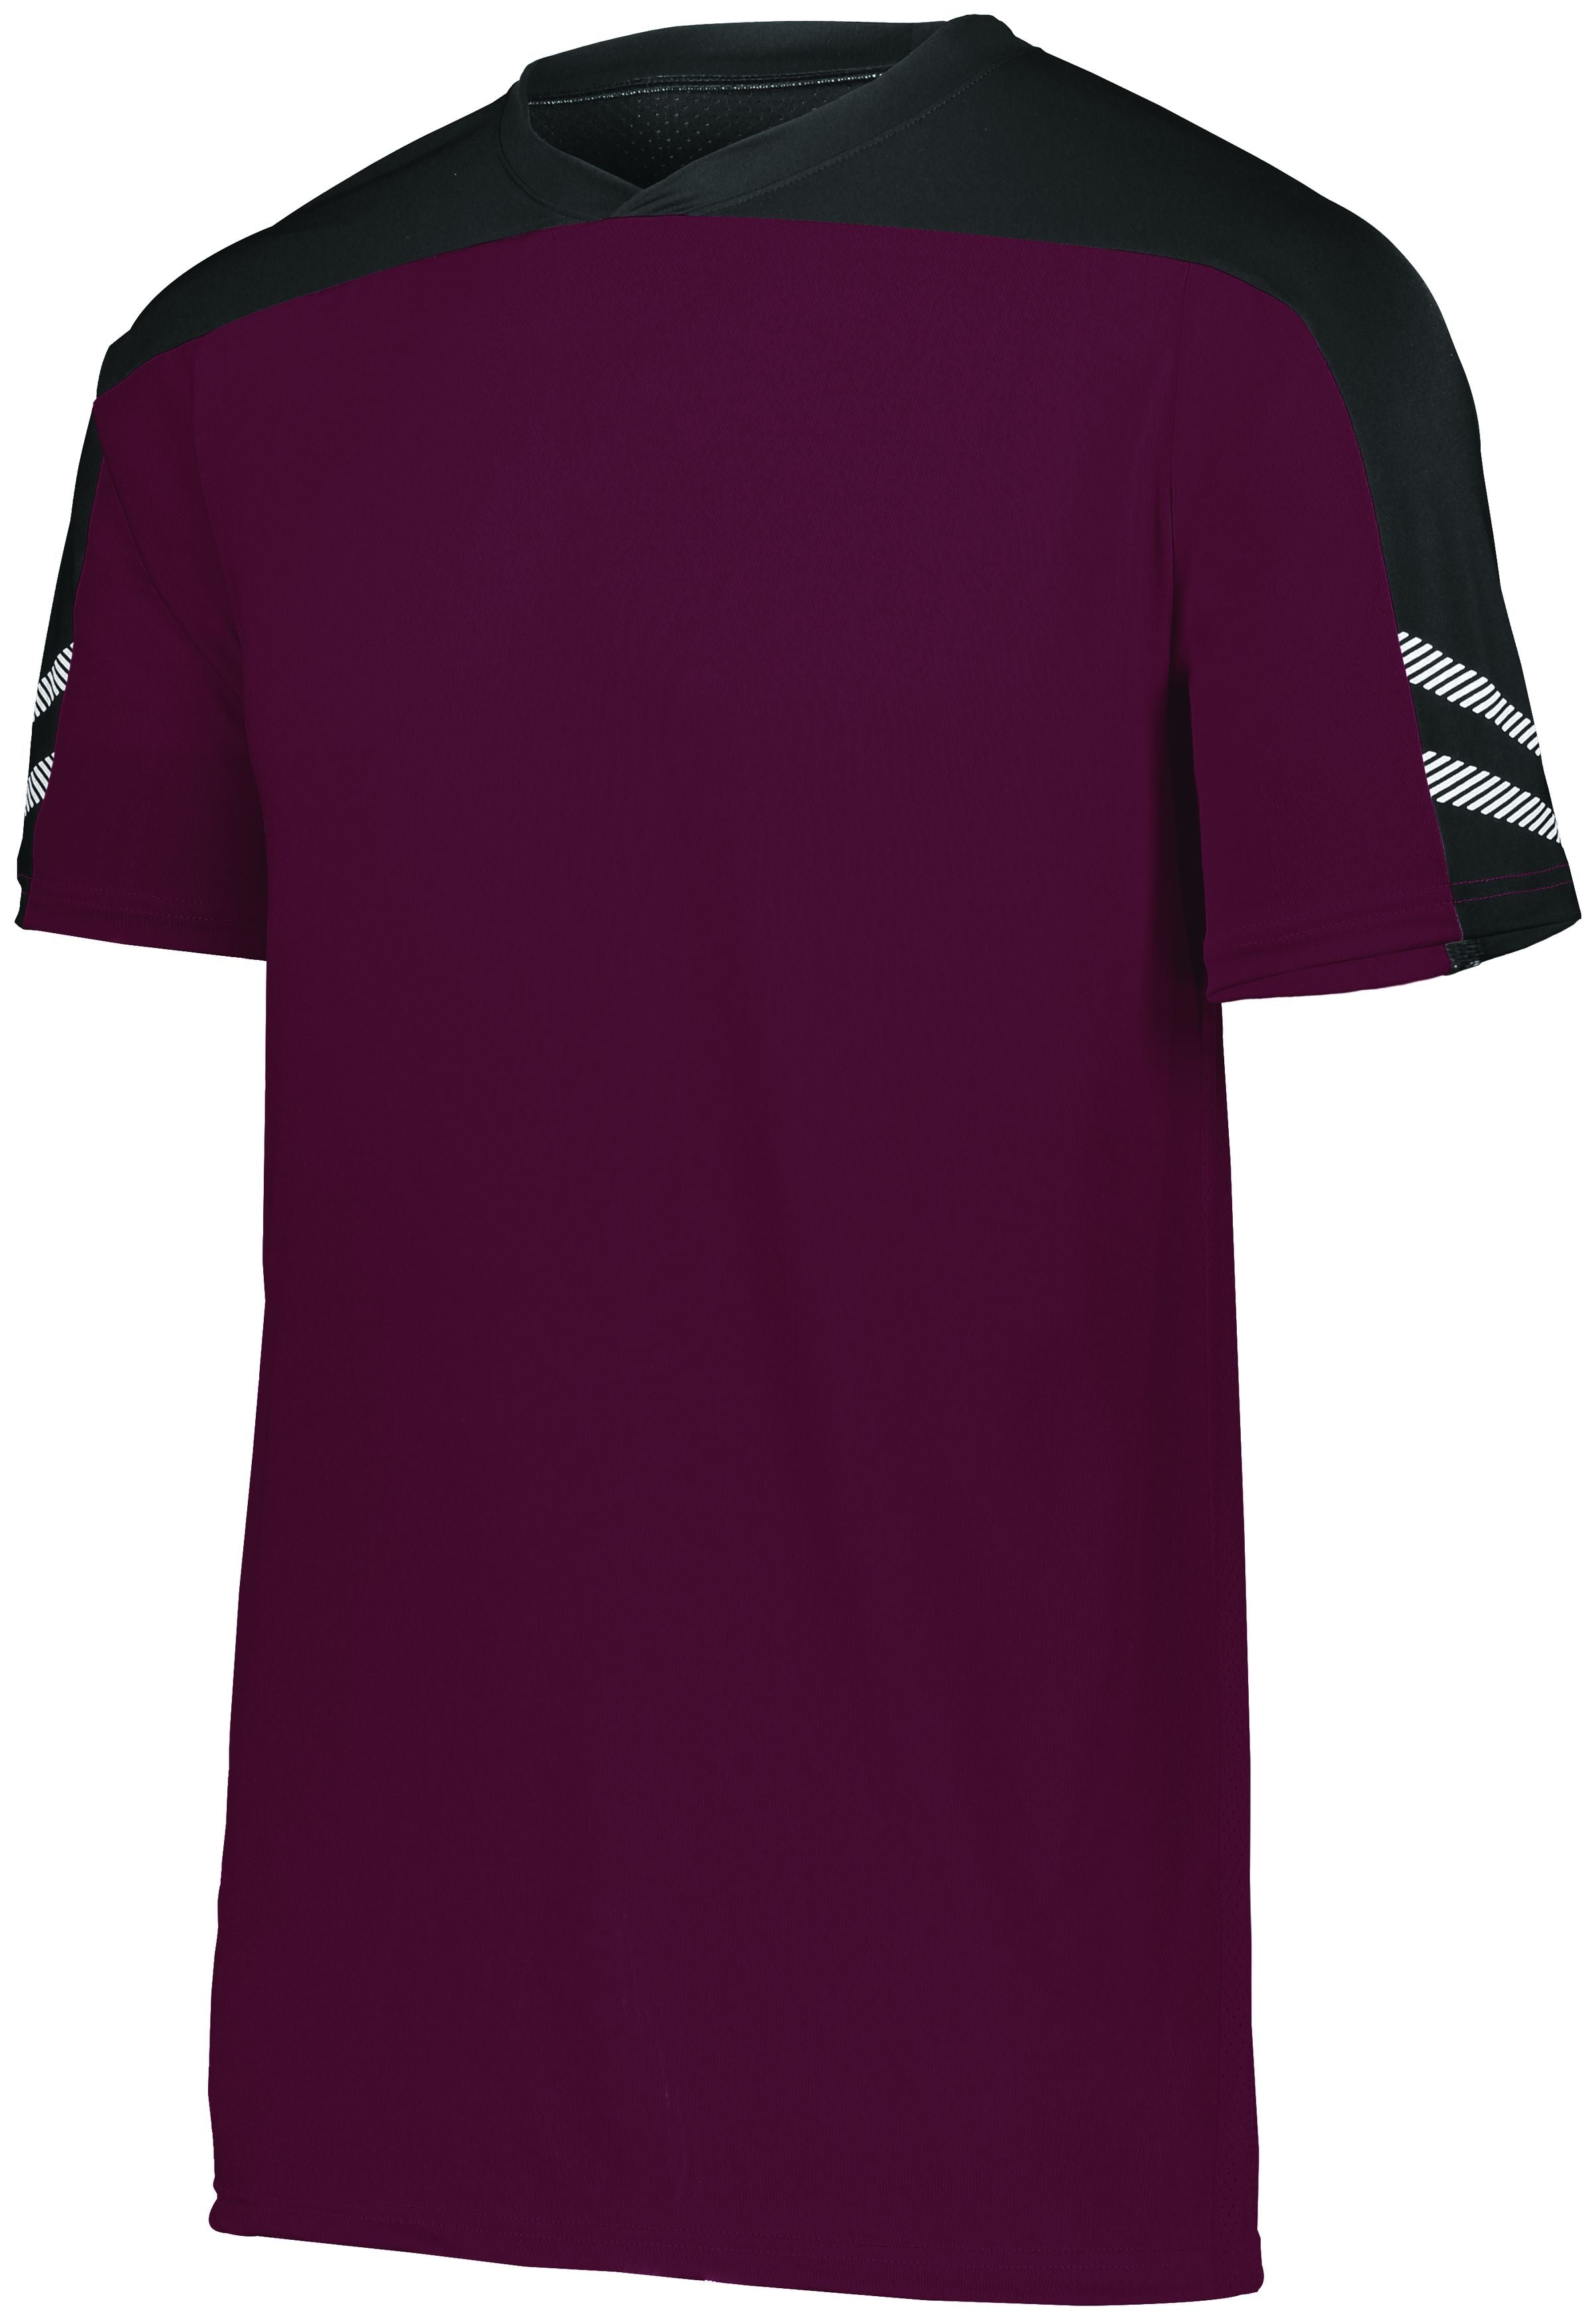 High 5 Anfield Soccer Jersey in Maroon/Black/White  -Part of the Adult, Adult-Jersey, High5-Products, Soccer, Shirts, All-Sports-1 product lines at KanaleyCreations.com